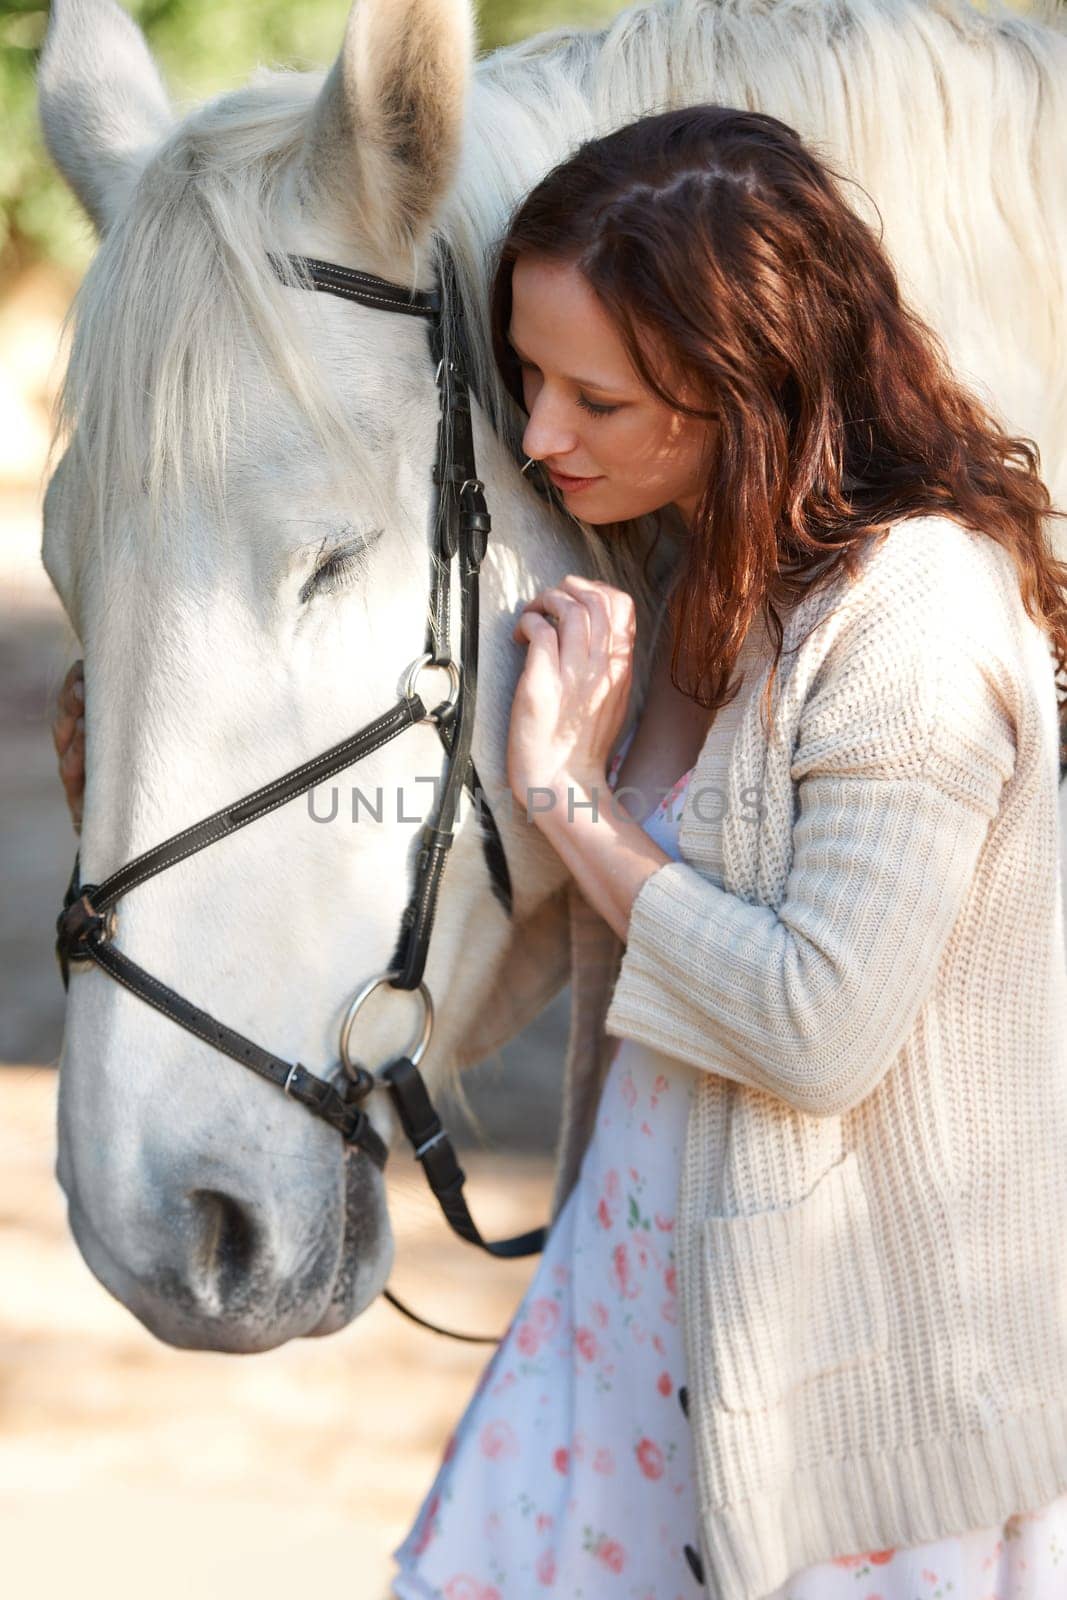 Adventure, love and young woman with her horse on an outdoor farm for sports racing. Smile, training and confident female person from Canada with her equestrian animal or pet in countryside ranch